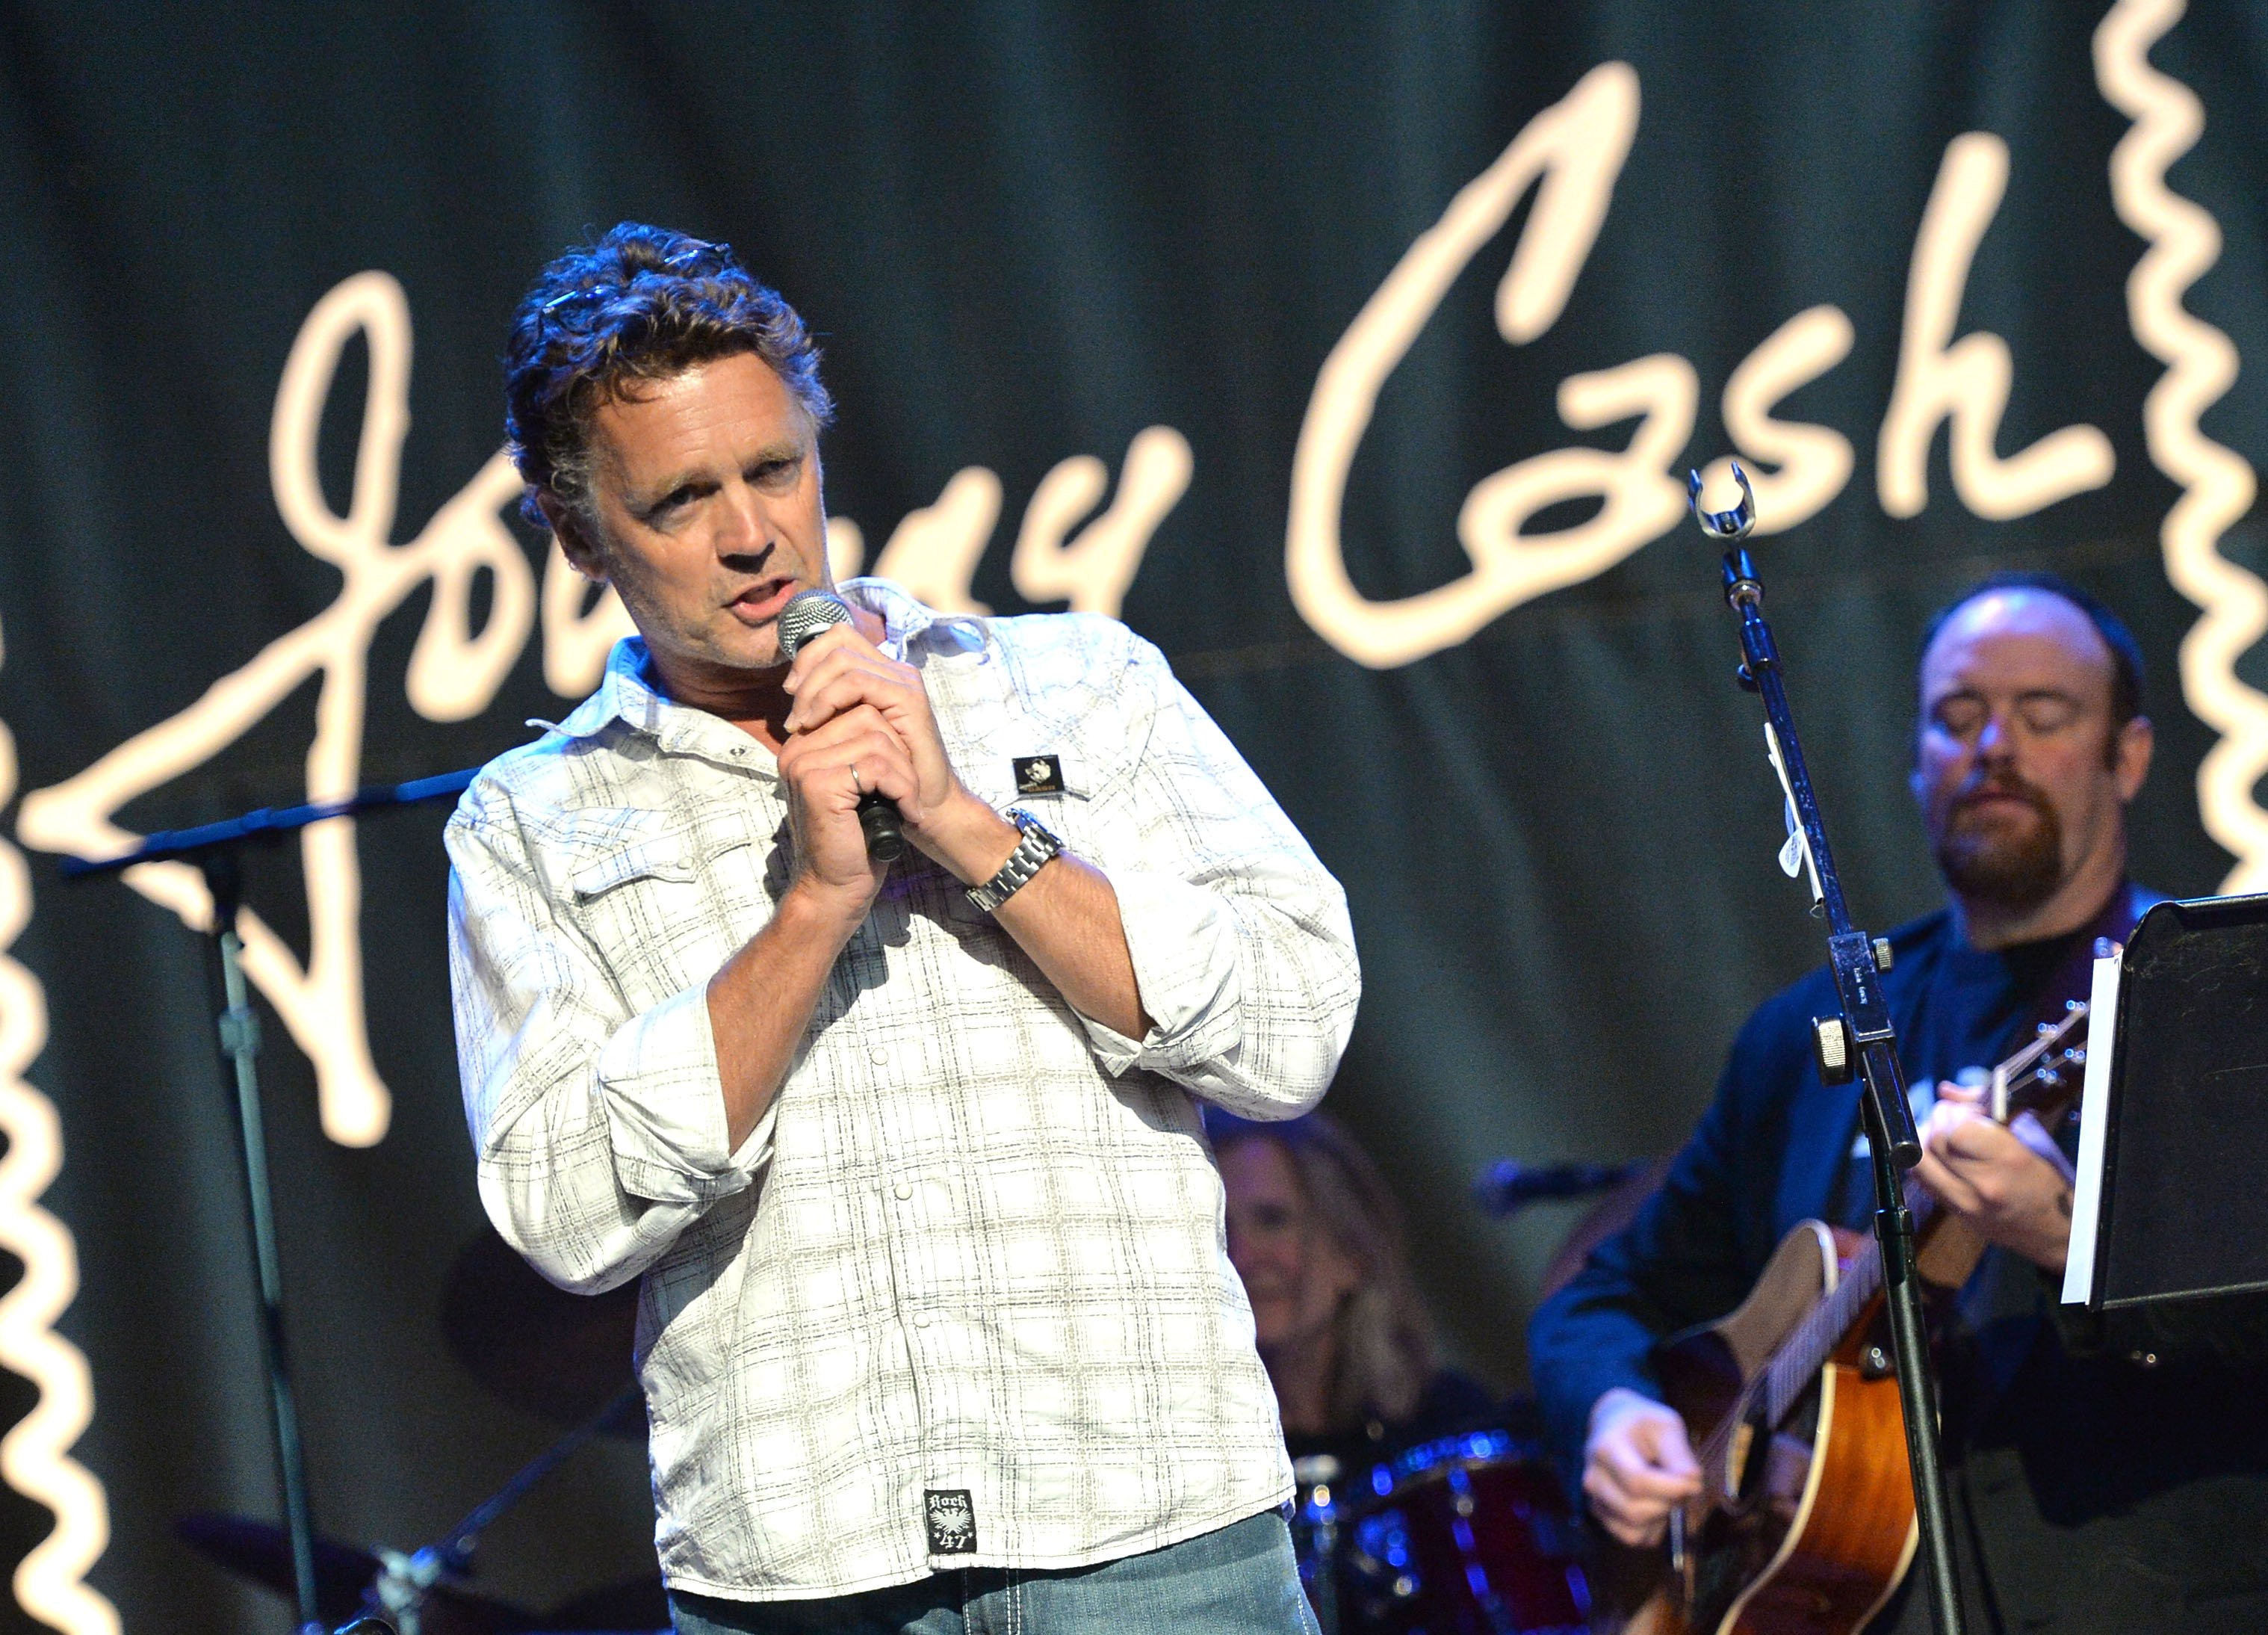  John Schneider and John Carter Cash perform at the Johnny Cash Limited-Edition Forever Stamp launch at Ryman Auditorium on June 5, 2013  | Photo: Getty Images